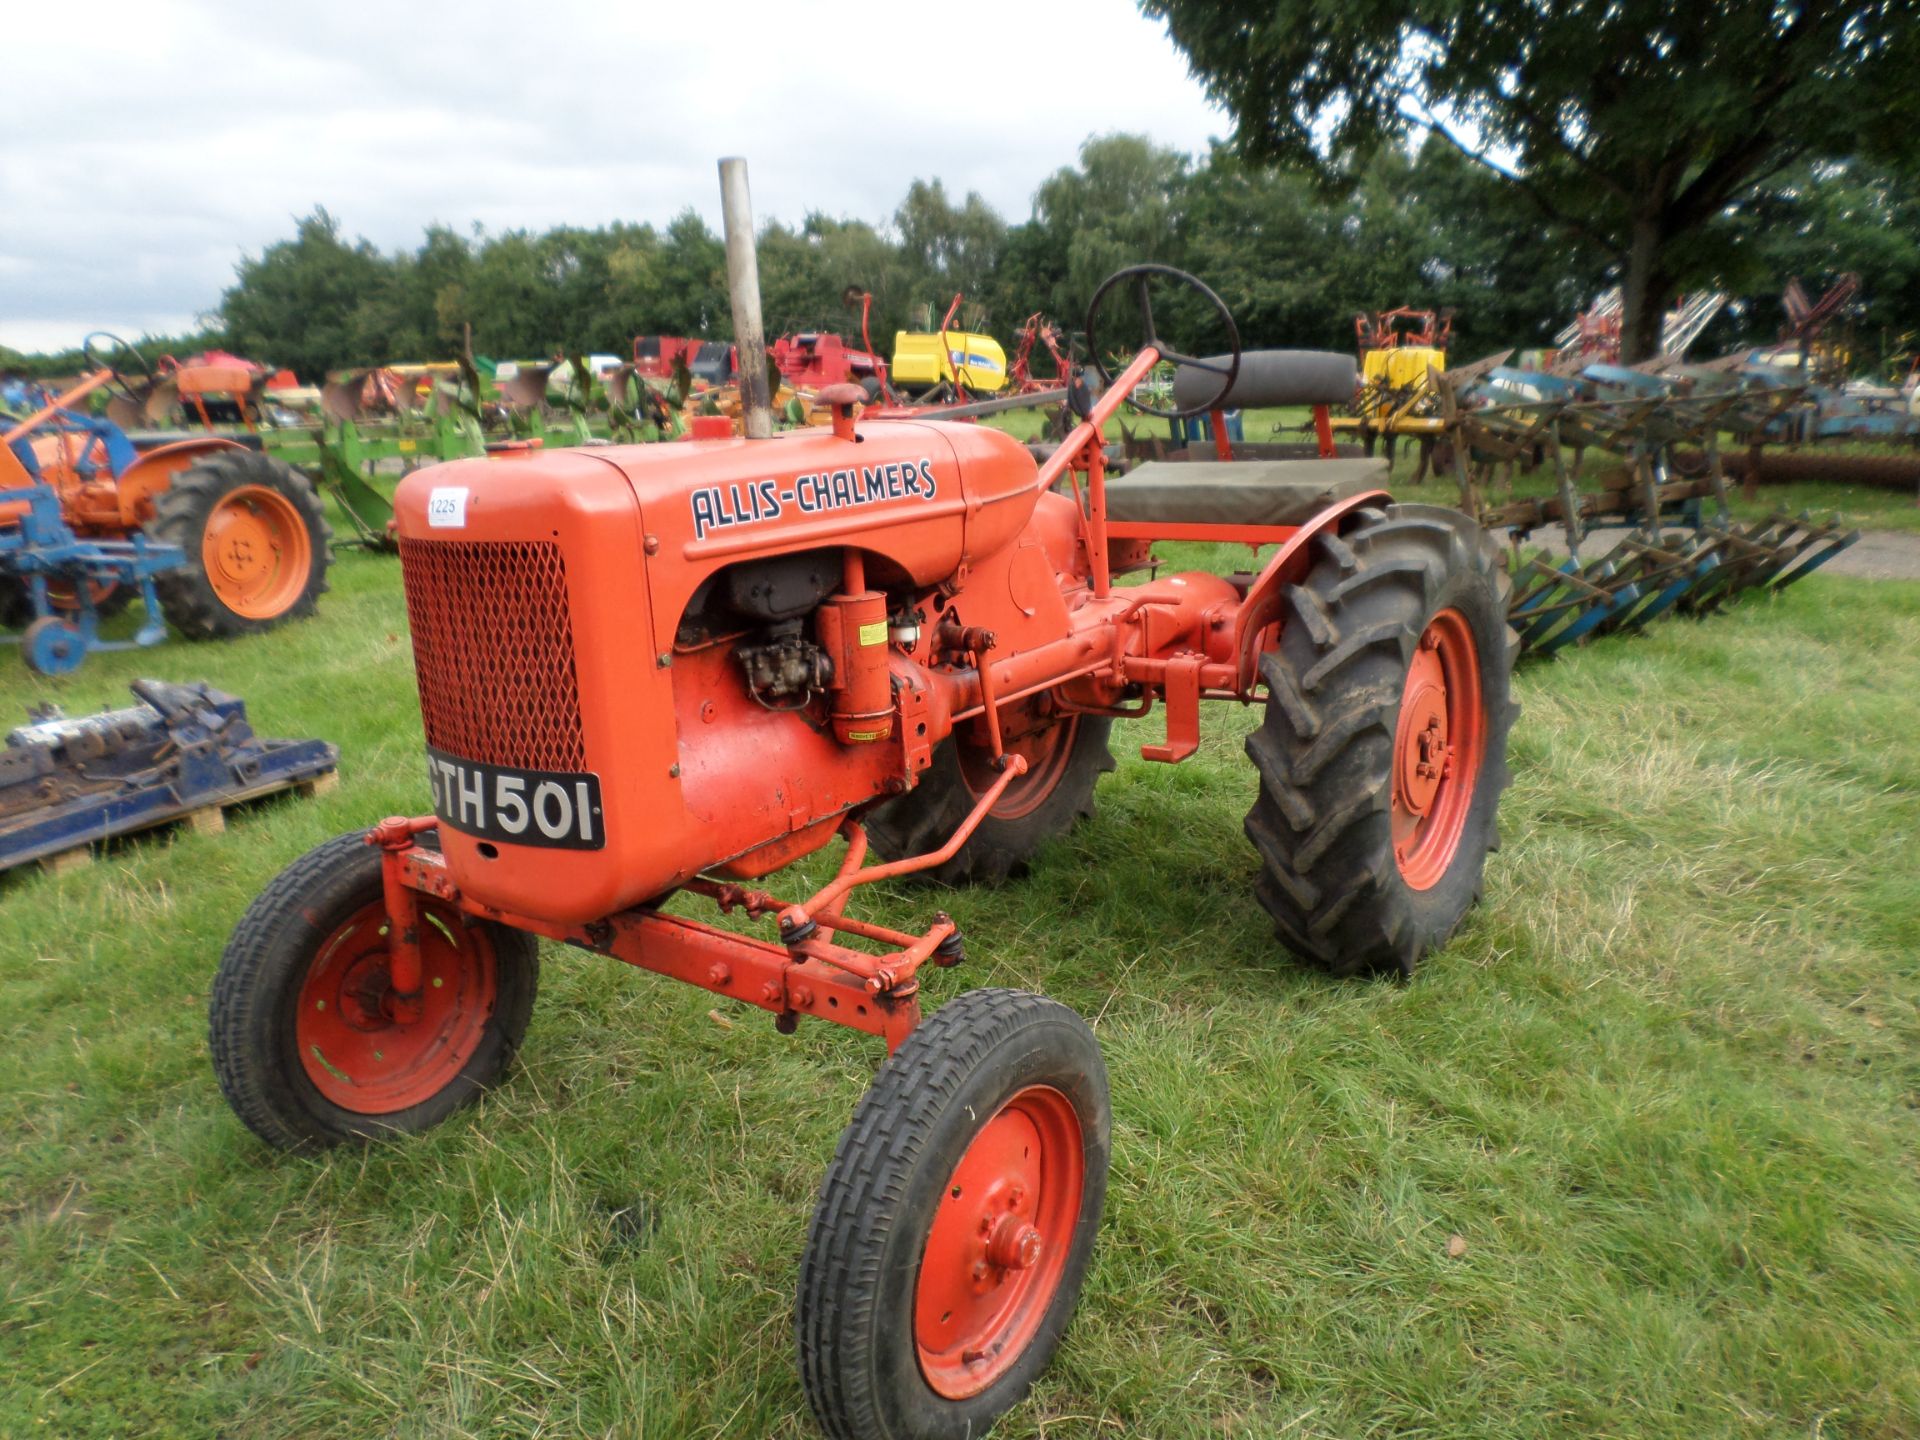 Allis Chalmers Model B tractor, registered November 1951, GTH 501 with old style buff logbook and